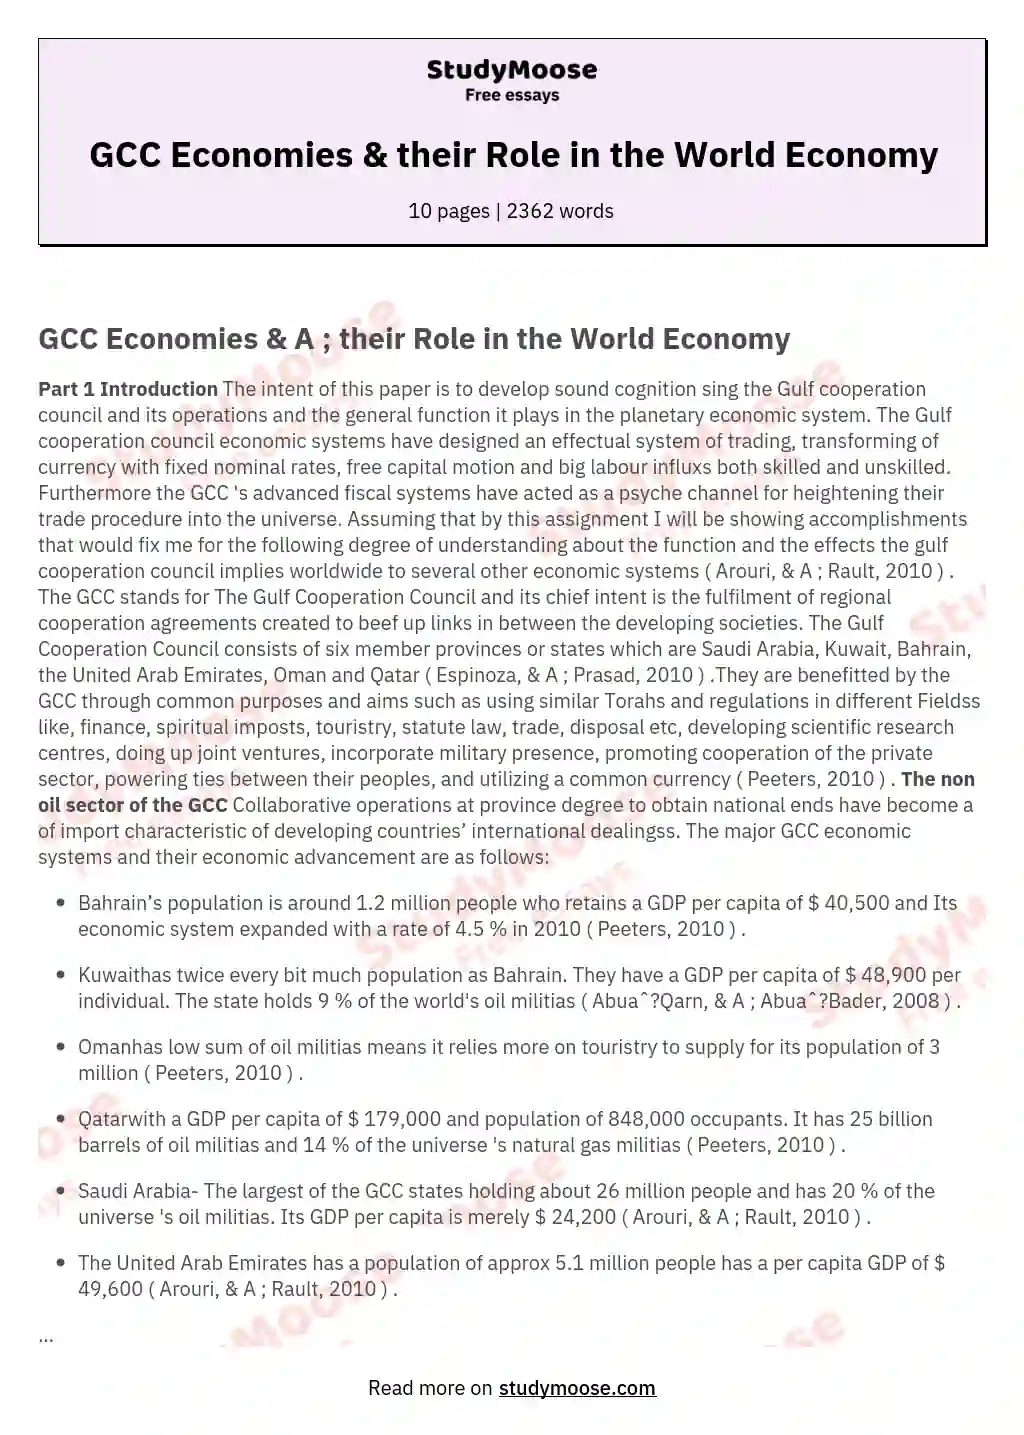 research paper about the global economy